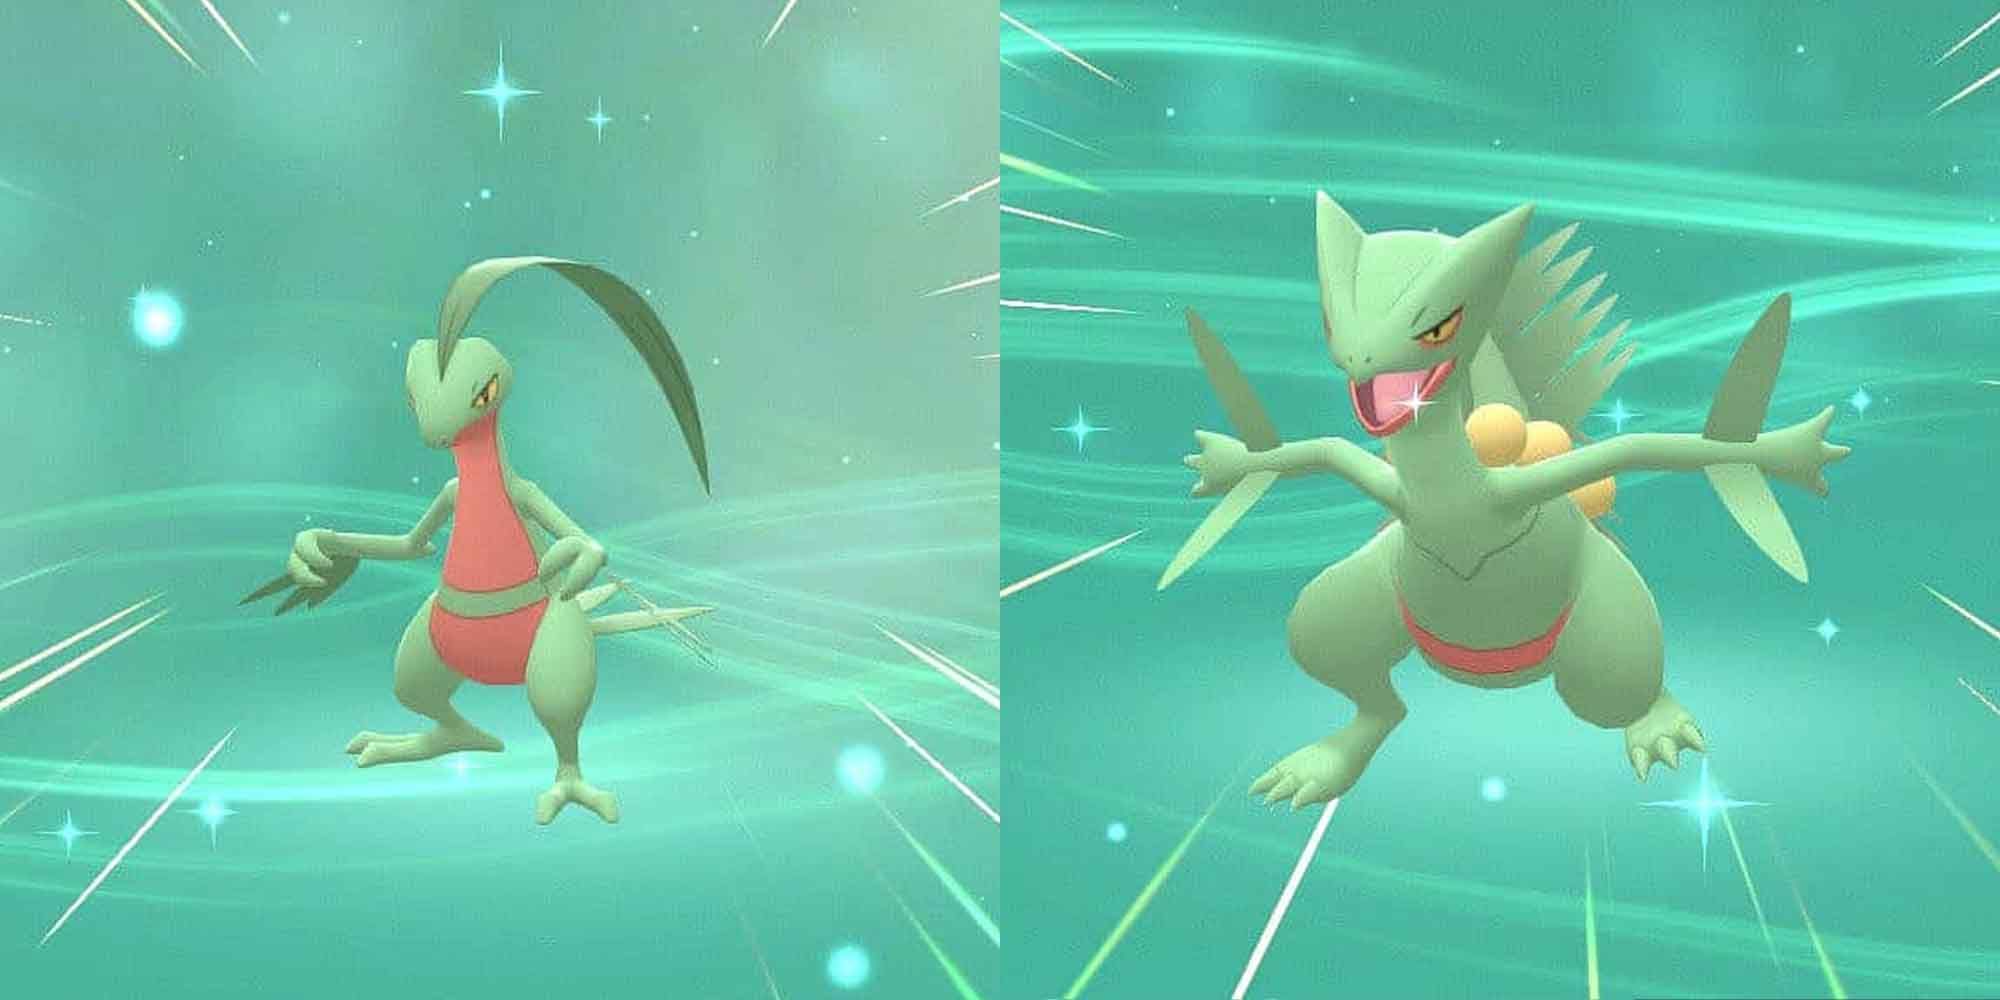 Grovyle and Sceptile from the Pokemon games